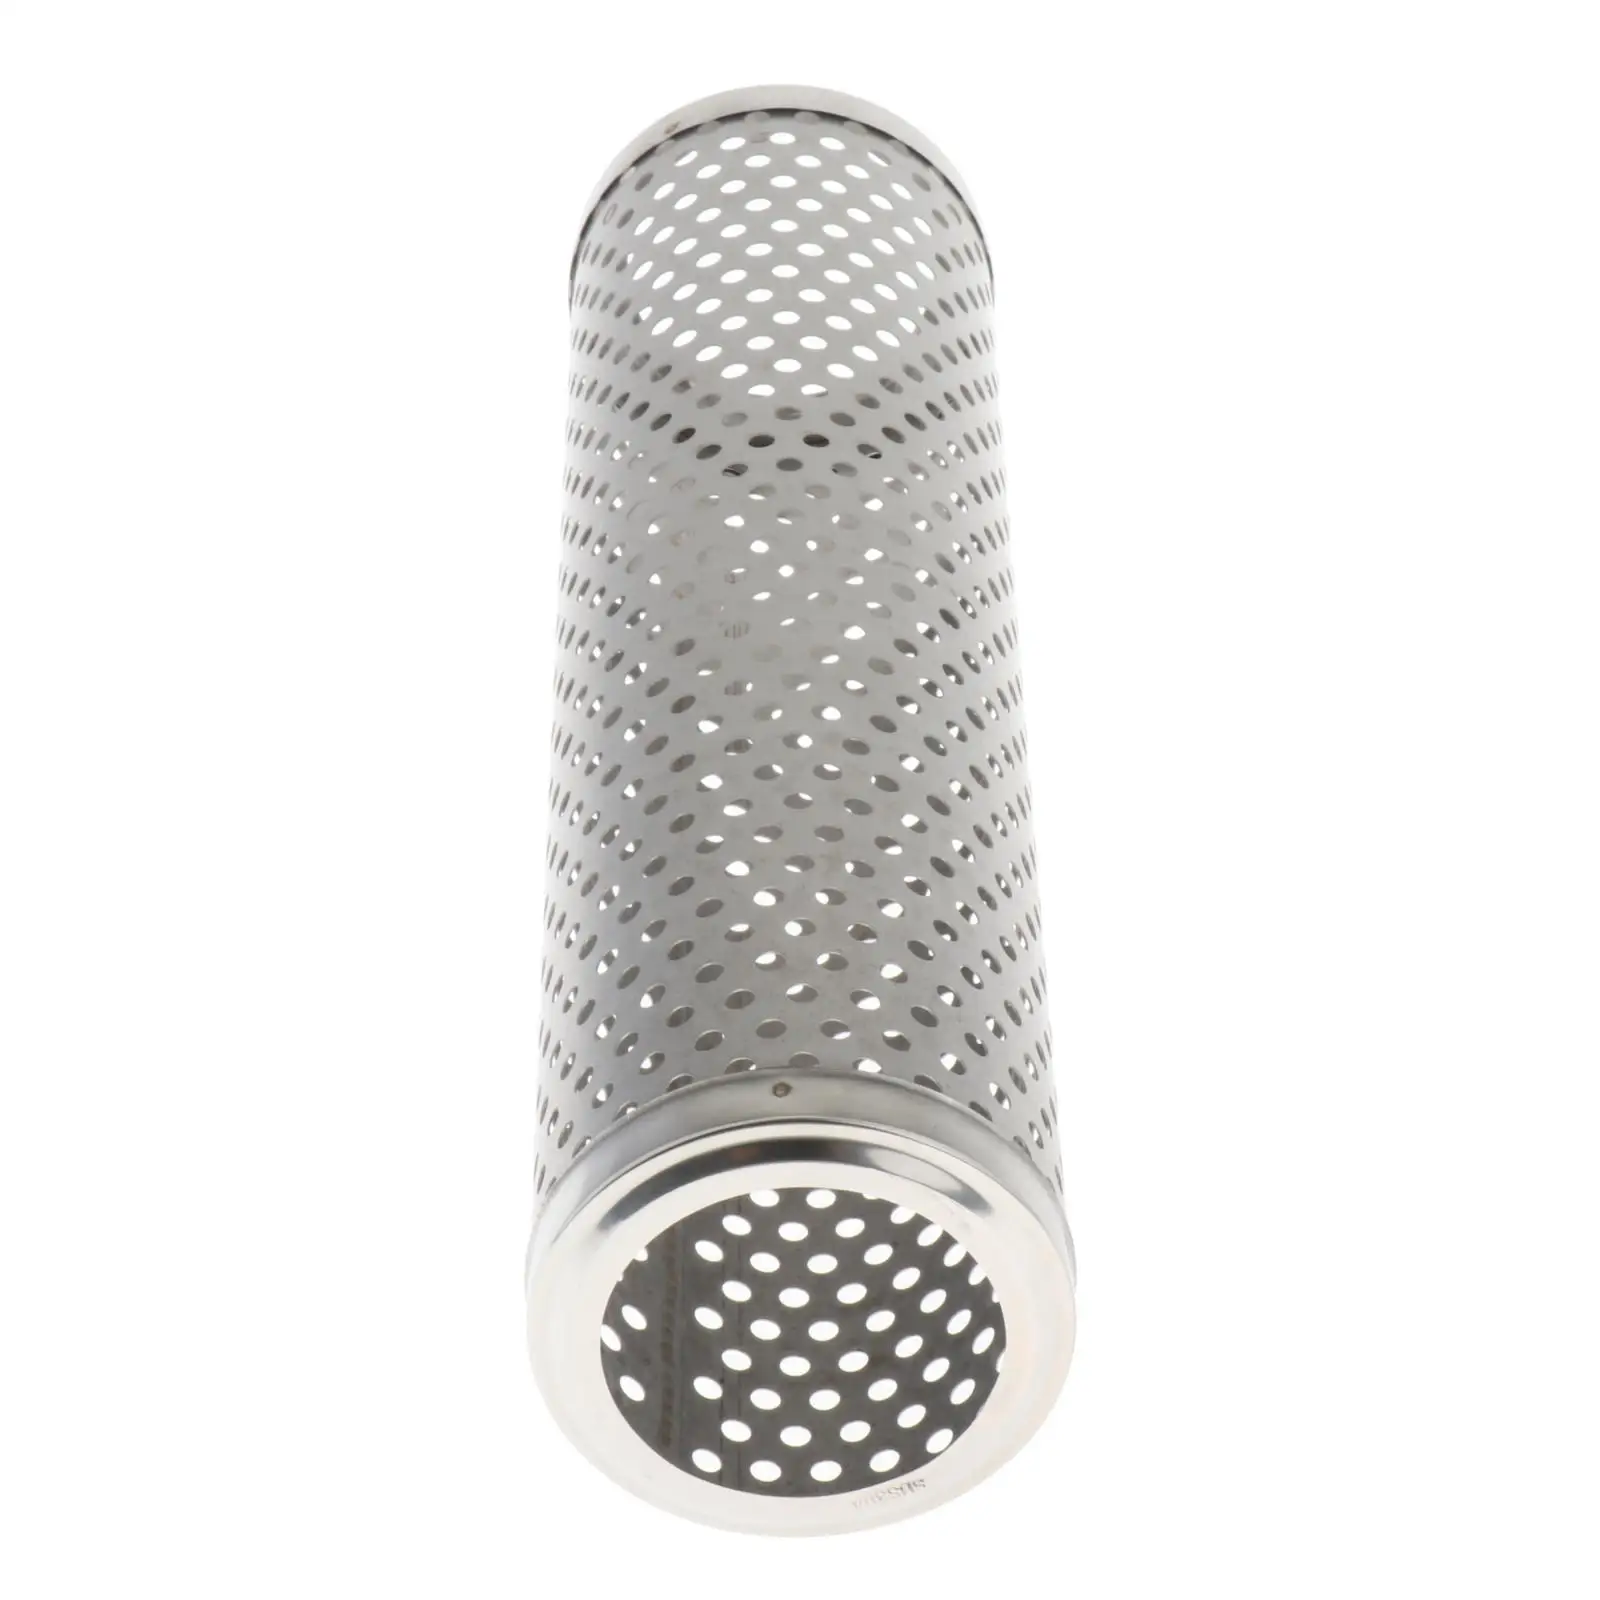 Stove Pipe Spark Arrestor Rain Caps Stainless Steel Chimney Tube Filter Screen Stovepipe Top Cap 2.5 inch